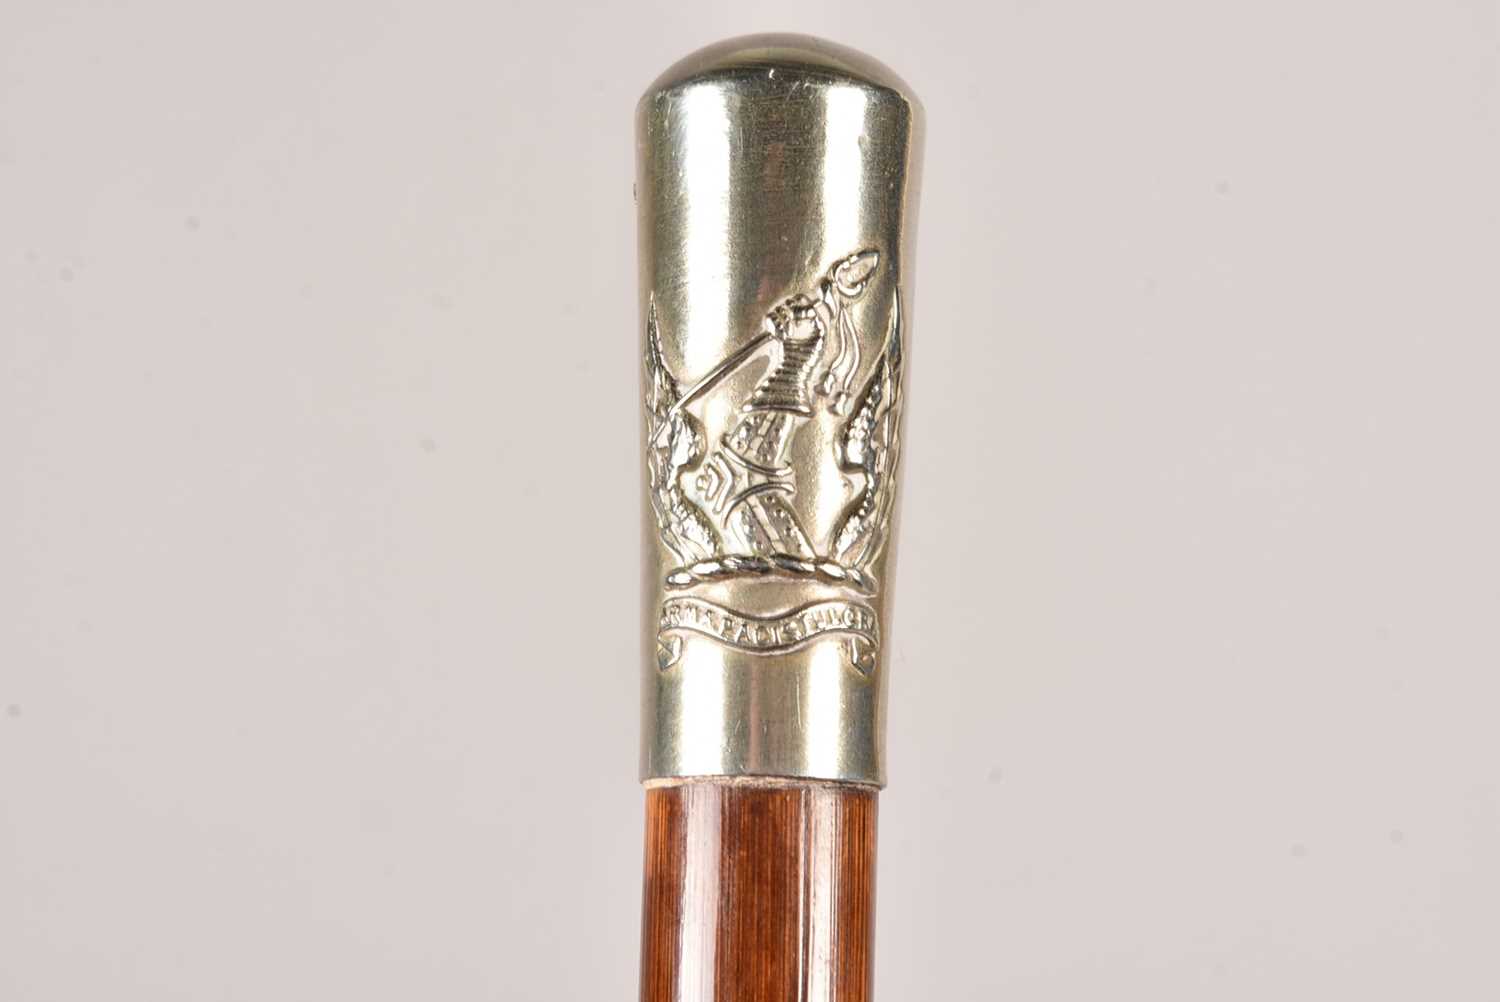 An Honourable Artillery Company (HAC) white metal topped swagger sword stick, - Image 5 of 6